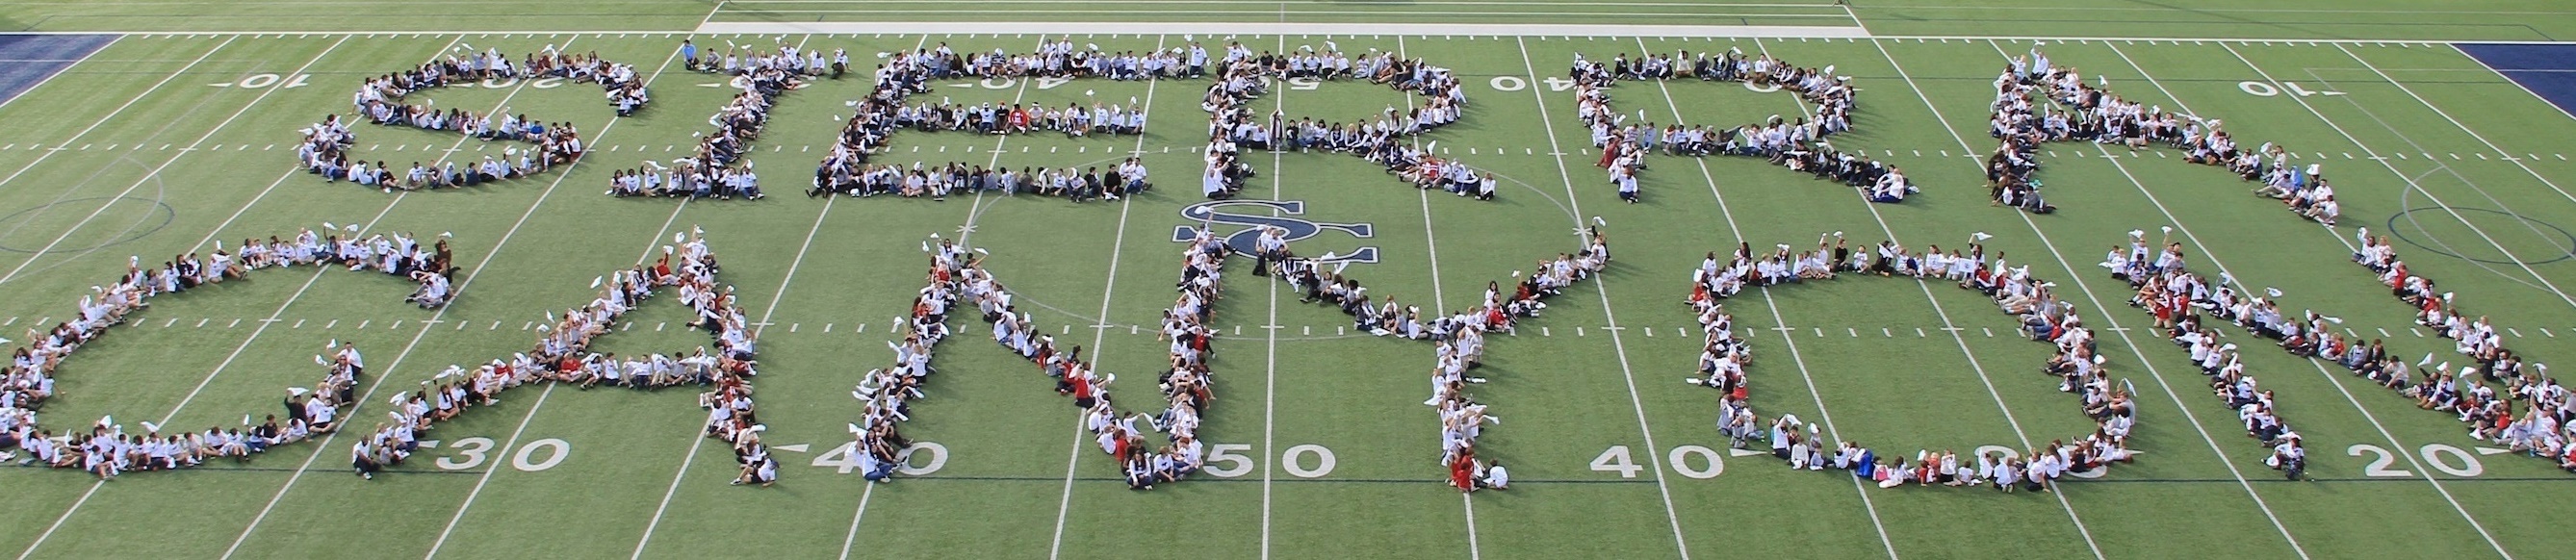 The faculty and student body spell out Sierra Canyon on the football field on Opening Day. Support the school annual fund!